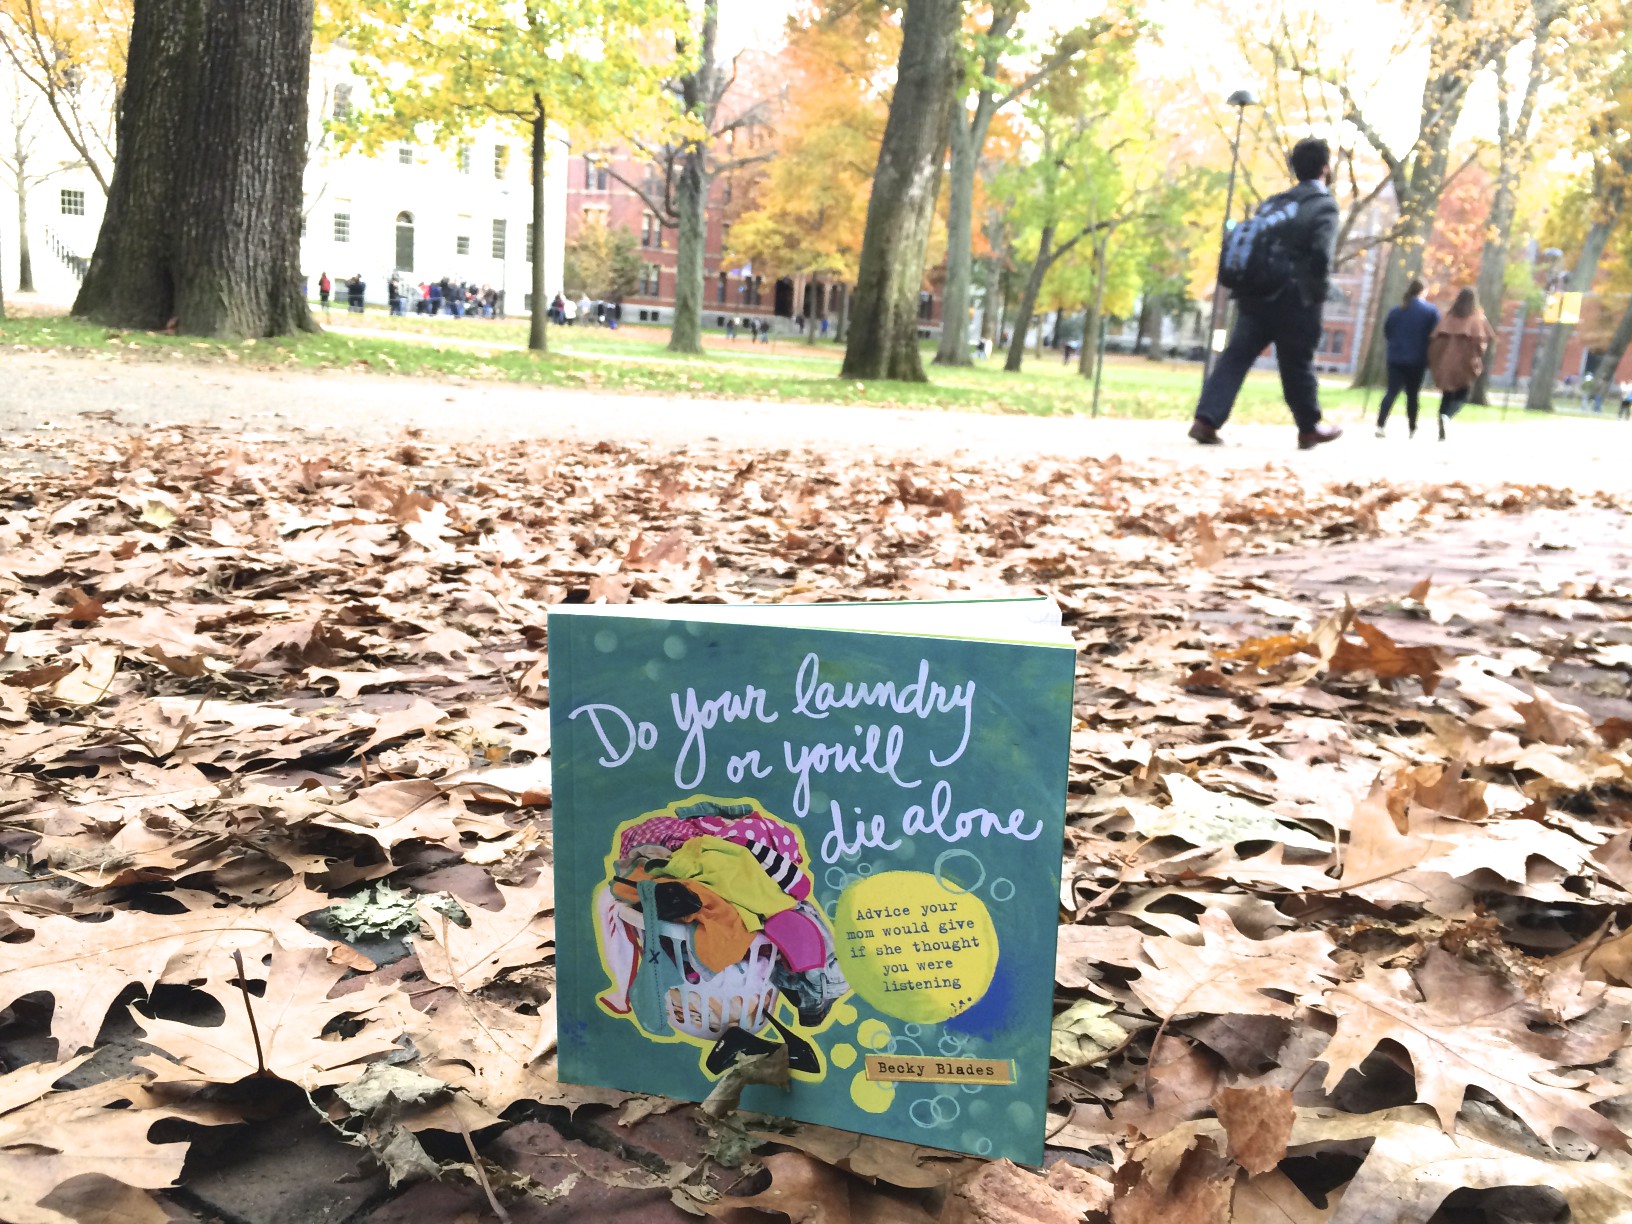  do your laundry or you'll die alone book on fall leaves at college campus